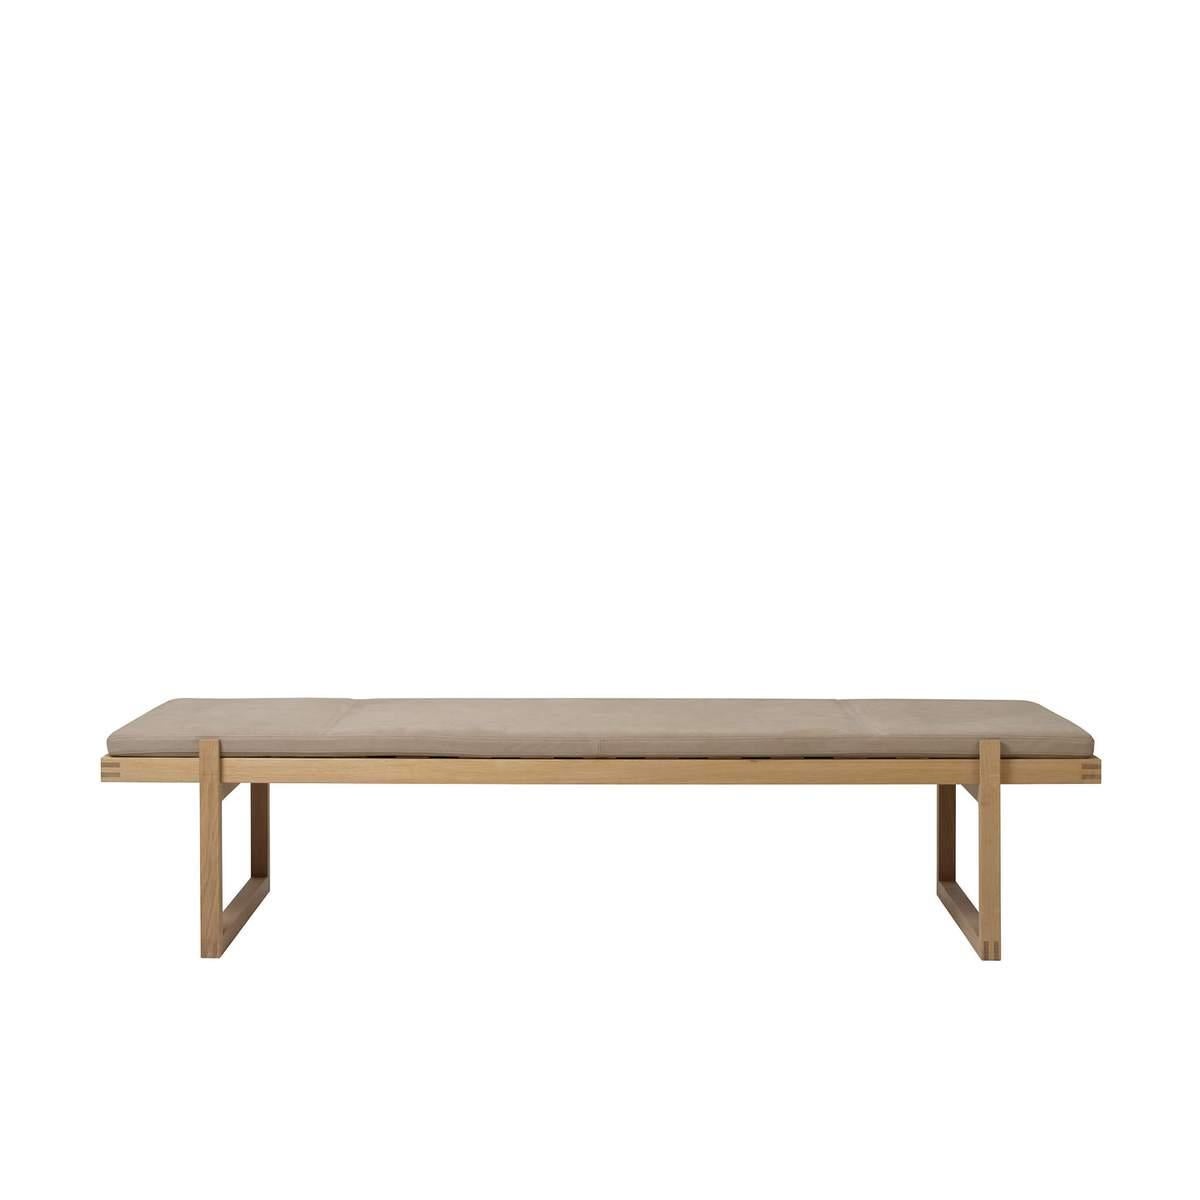 Light brown minimal daybed by Kristina Dam Studio.
Materials: solid oak with oil treatment, light brown aniline Nubuck. 
Also available in other colors. 
Dimensions: 70 x 200 x H 44cm.

Minimal Daybed combines Japanese and Scandinavian minimal